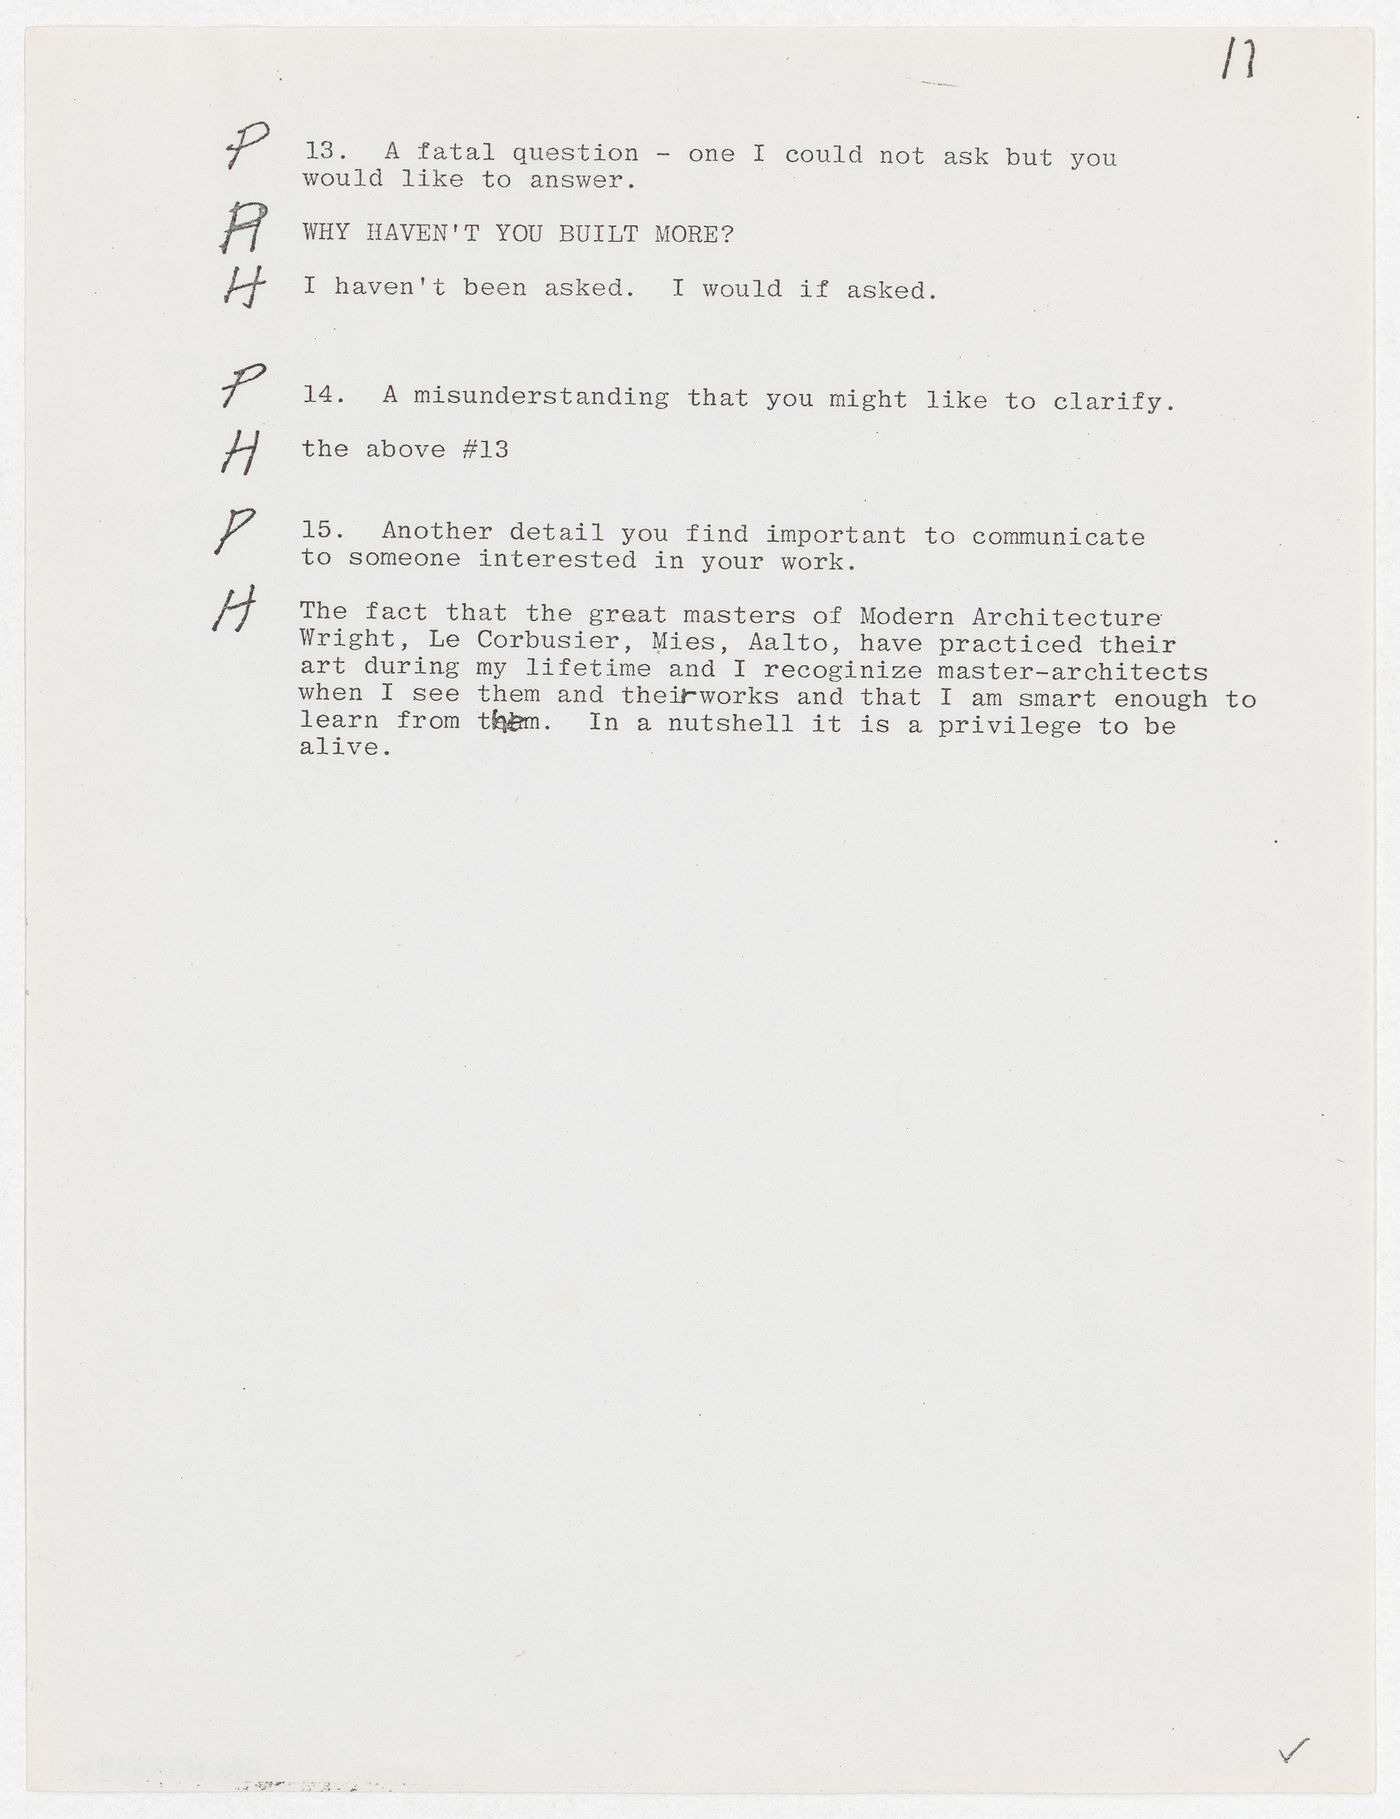 Transcript of an interview with John Hejduk (by Reima Pietila?), related to the publication of the exhibition catalogue, "John Hejduk, 7 Houses : January 22 to February 16, 1980"